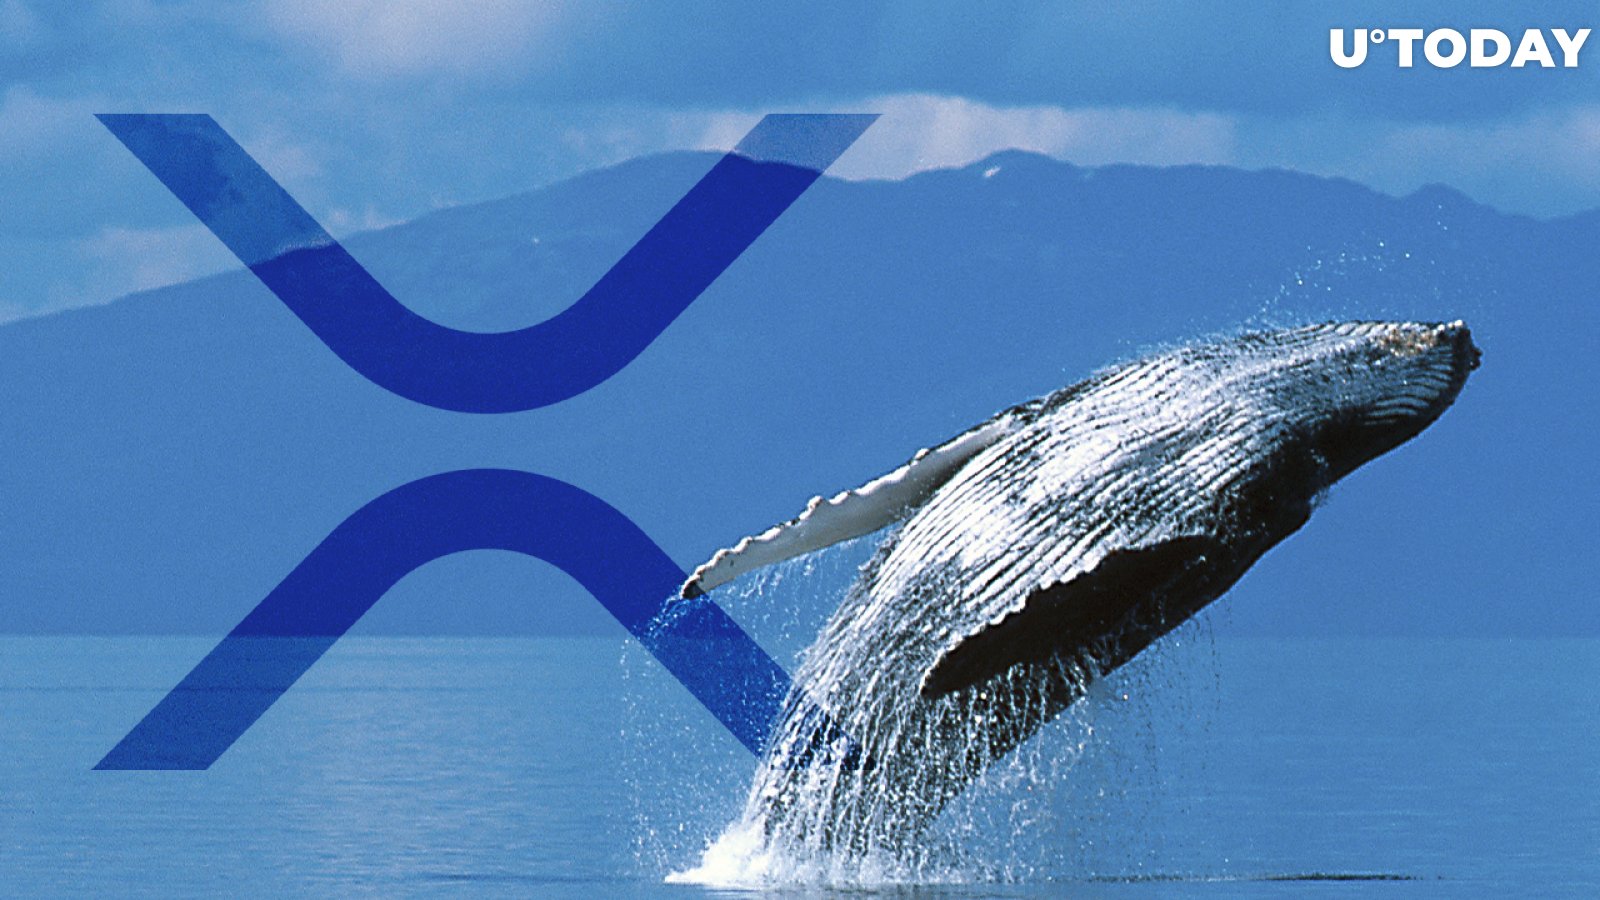 $40 Million Worth of XRP Withdrawn by This Whale from Binance, Here Are Potential Reasons